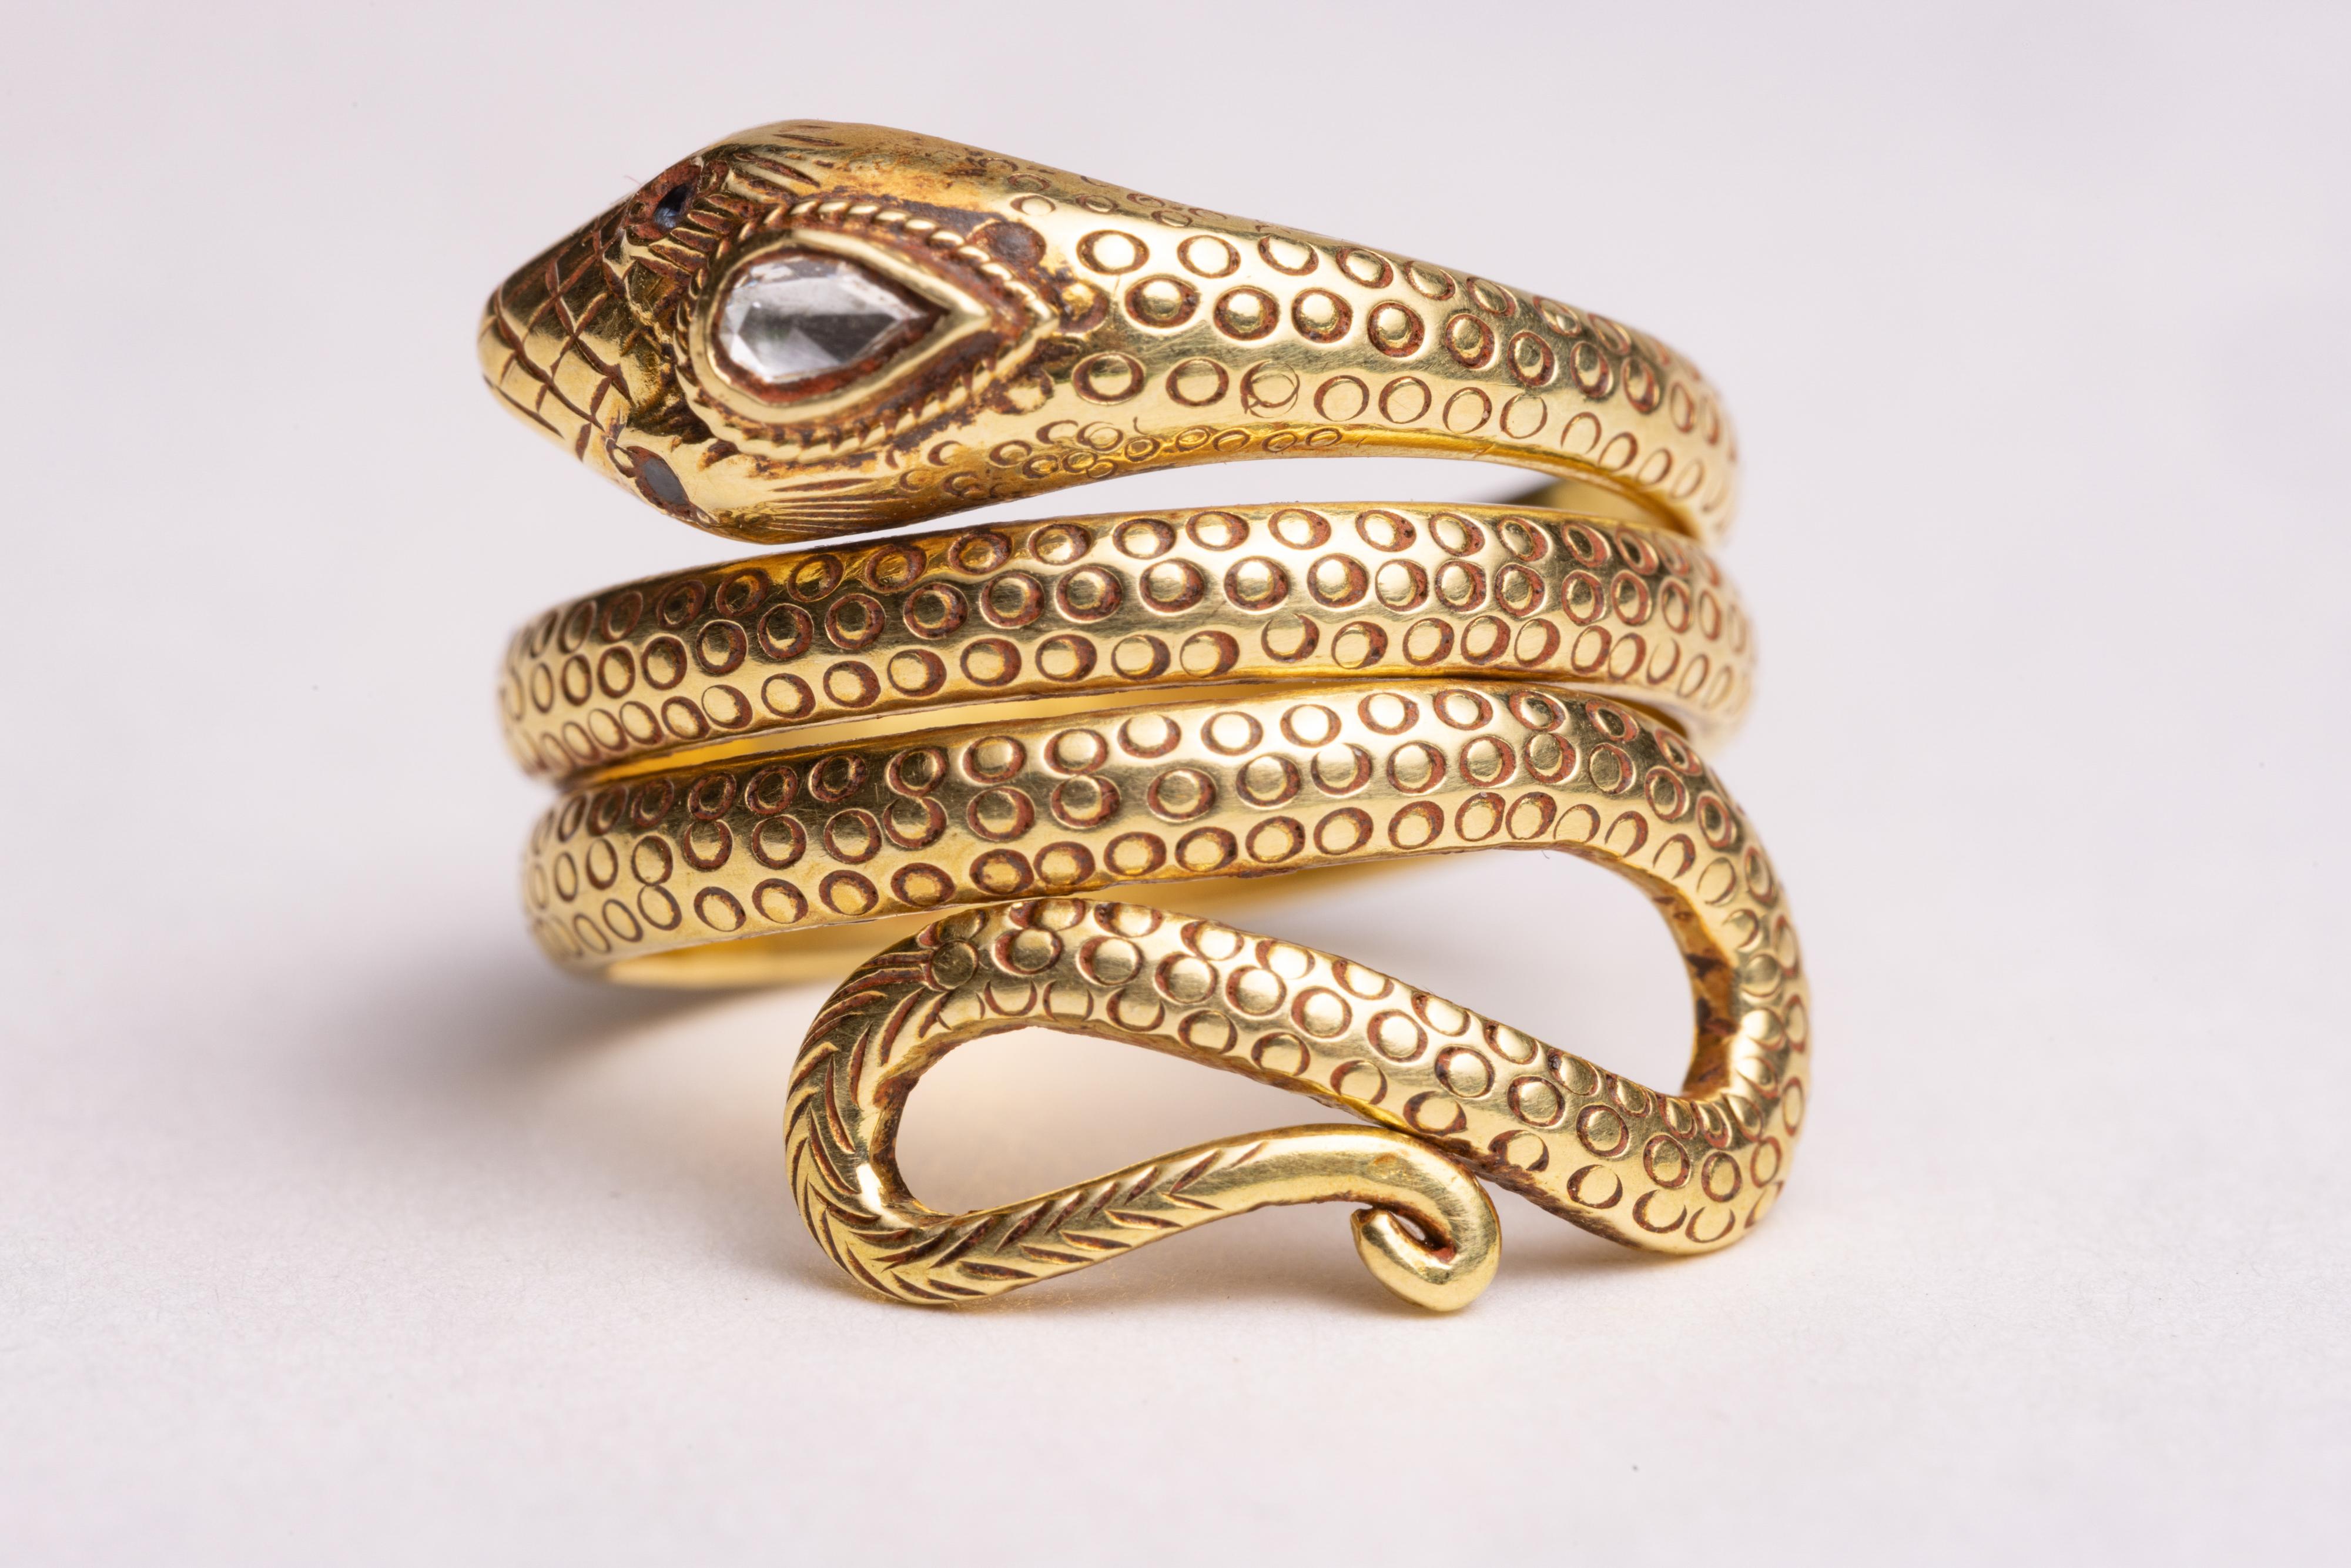 An unusual and stunning 18K gold coiled snake ring with fine hand-tooled workmanship along the band depicting the scales of the snake.  It features a faceted, pear-shaped diamond at the third eye and small round faceted sapphires for the eyes.  Ring